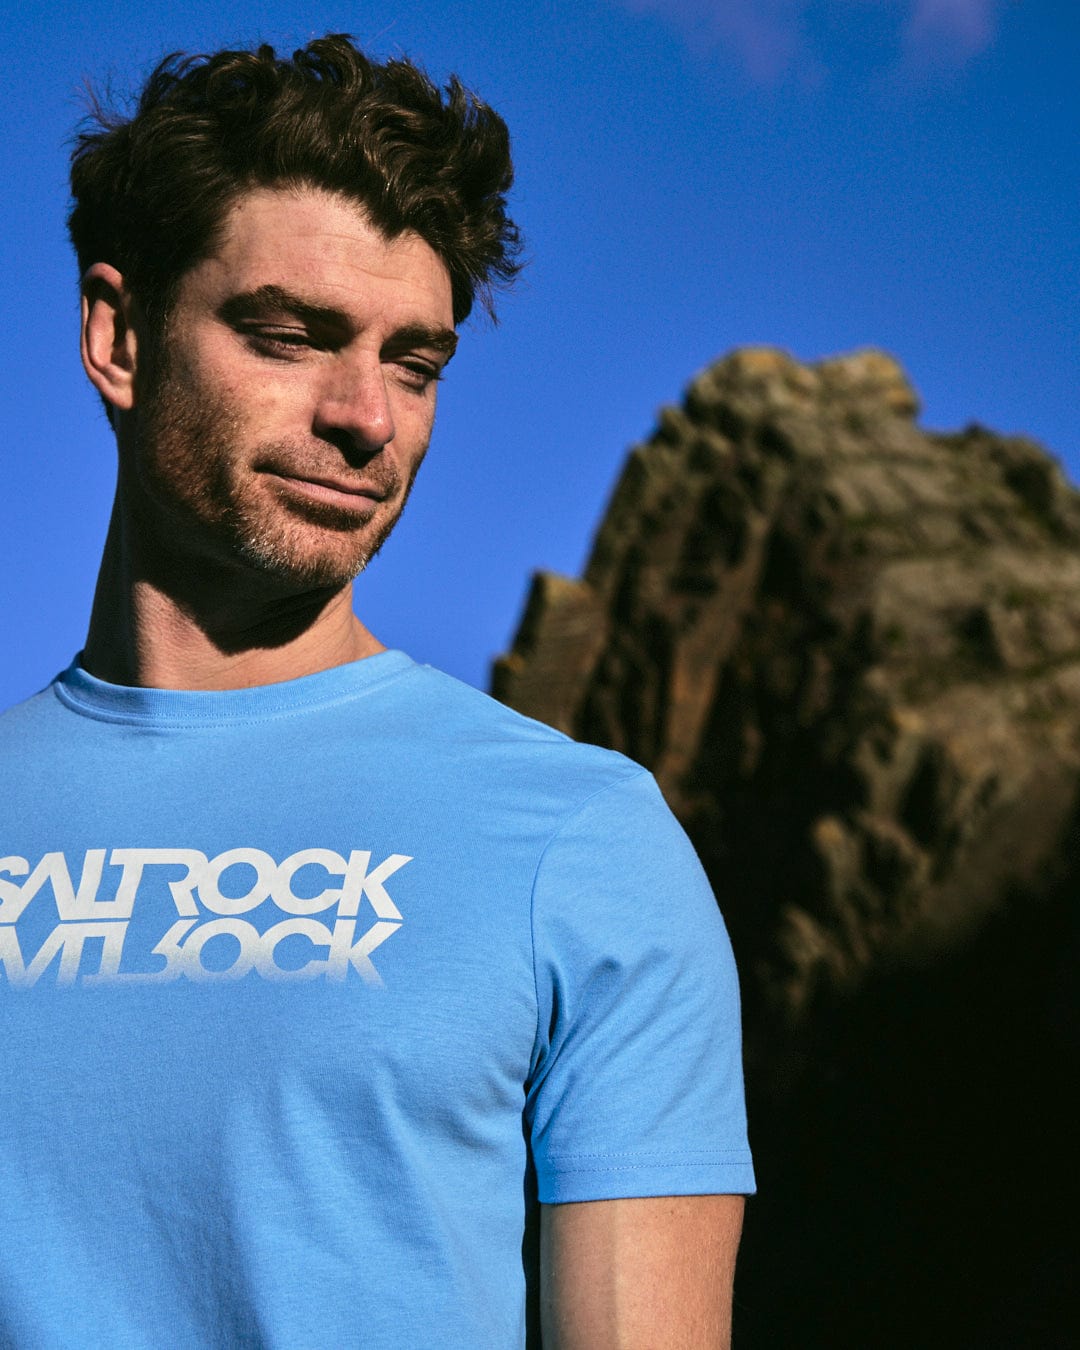 A man in a Saltrock Reflect Mens T-Shirt - Blue with a crew neck standing in front of a rock.